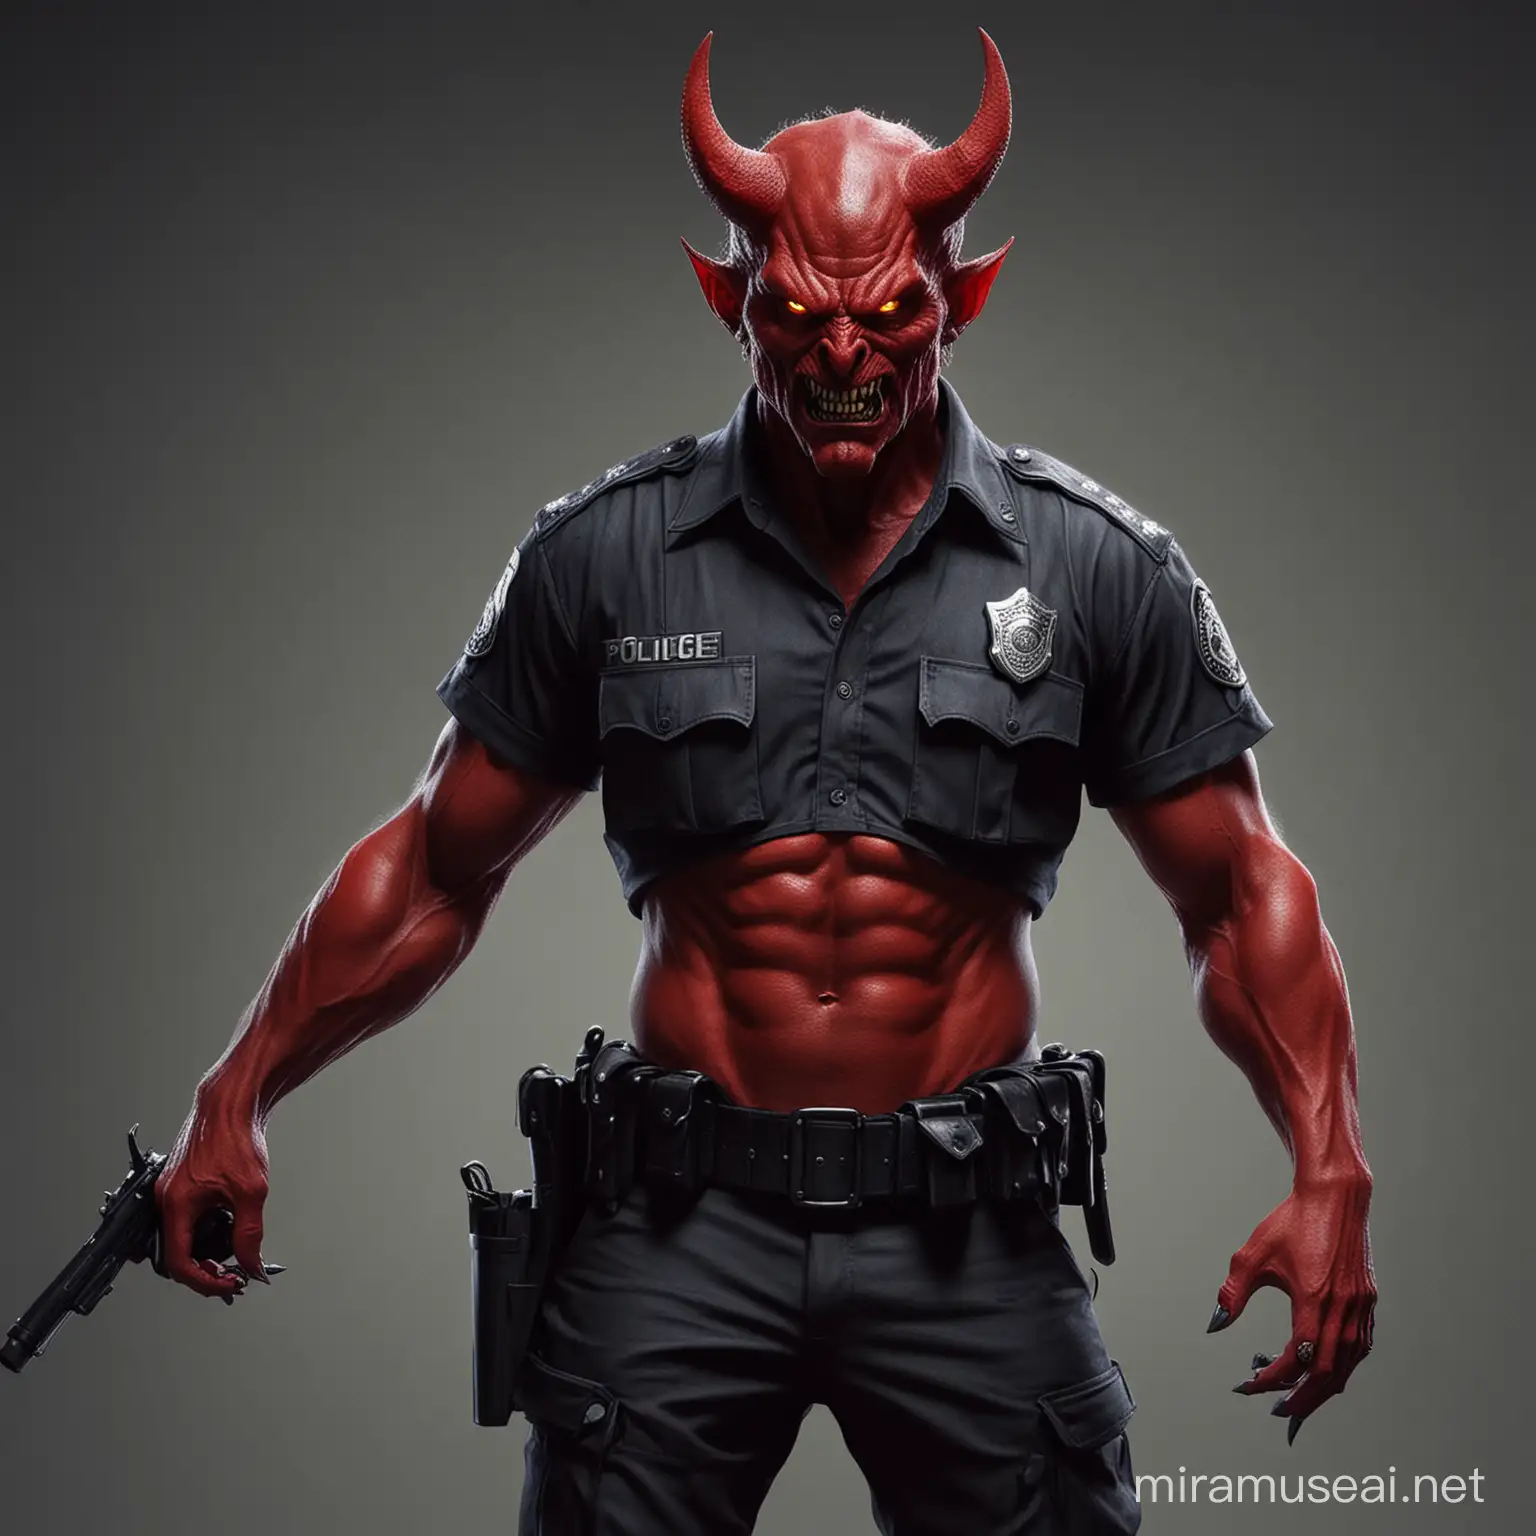 Police, red, demon